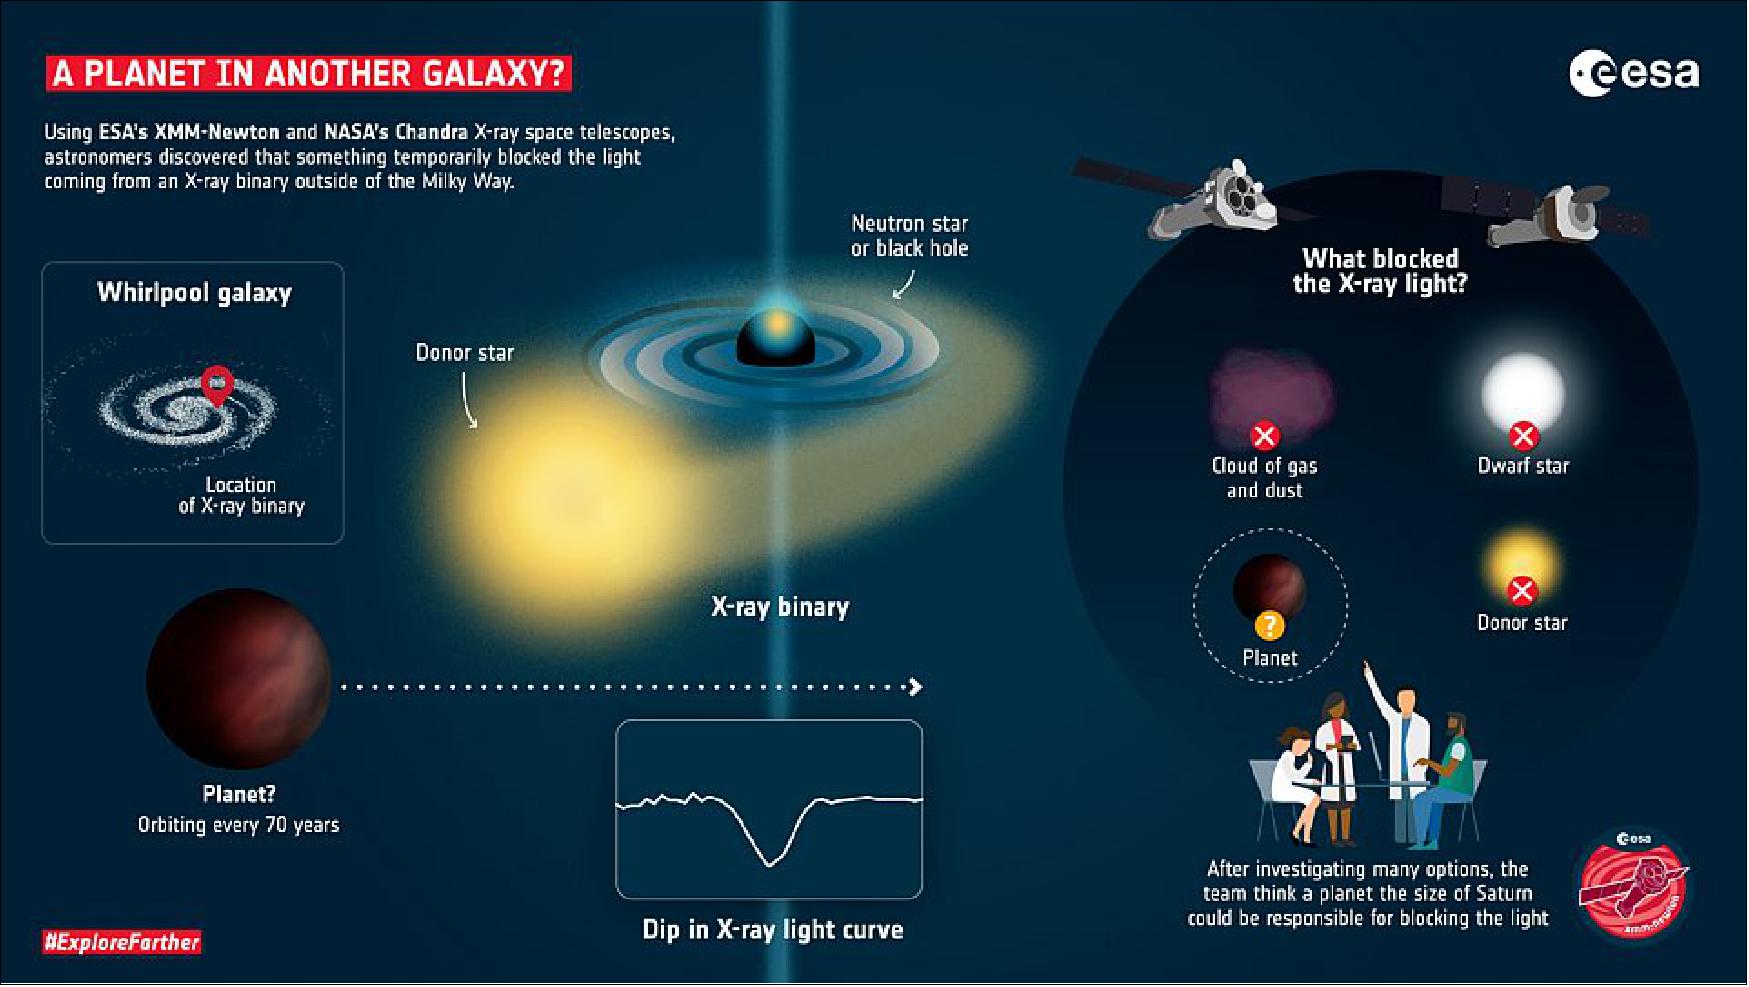 Figure 20: A planet in another galaxy - infographic. Using ESA's XMM-Newton and NASA's Chandra X-ray space telescopes, astronomers discovered that something temporarily blocked the light coming from an X-ray binary outside of the Milky Way. After investigating many options, the team thinks a planet the size of Saturn could be responsible for blocking the light (image credit: ESA)